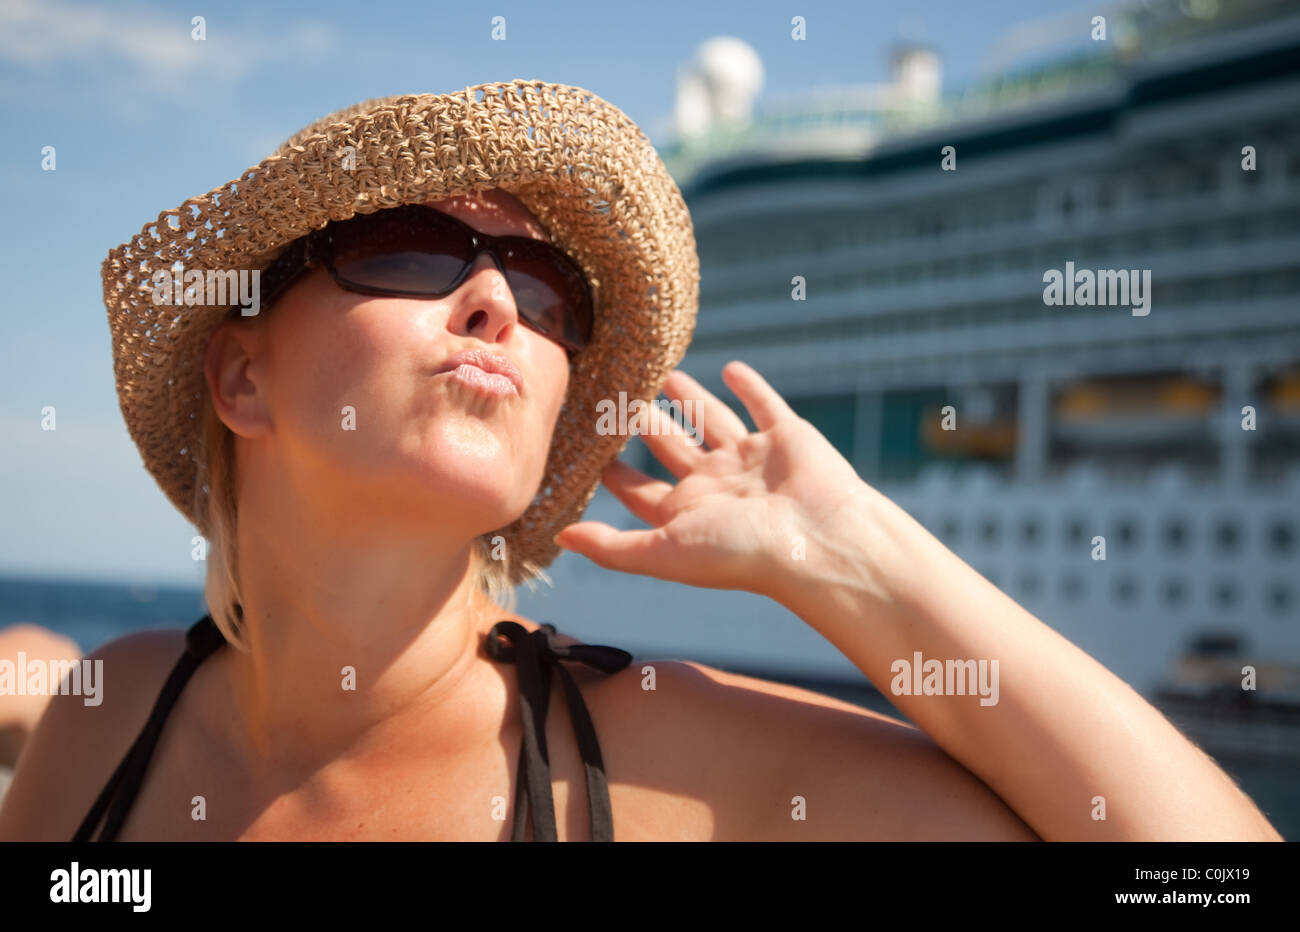 Beautiful Vacationing Woman on Tender Boat with Cruise Ship in the Background. Stock Photo